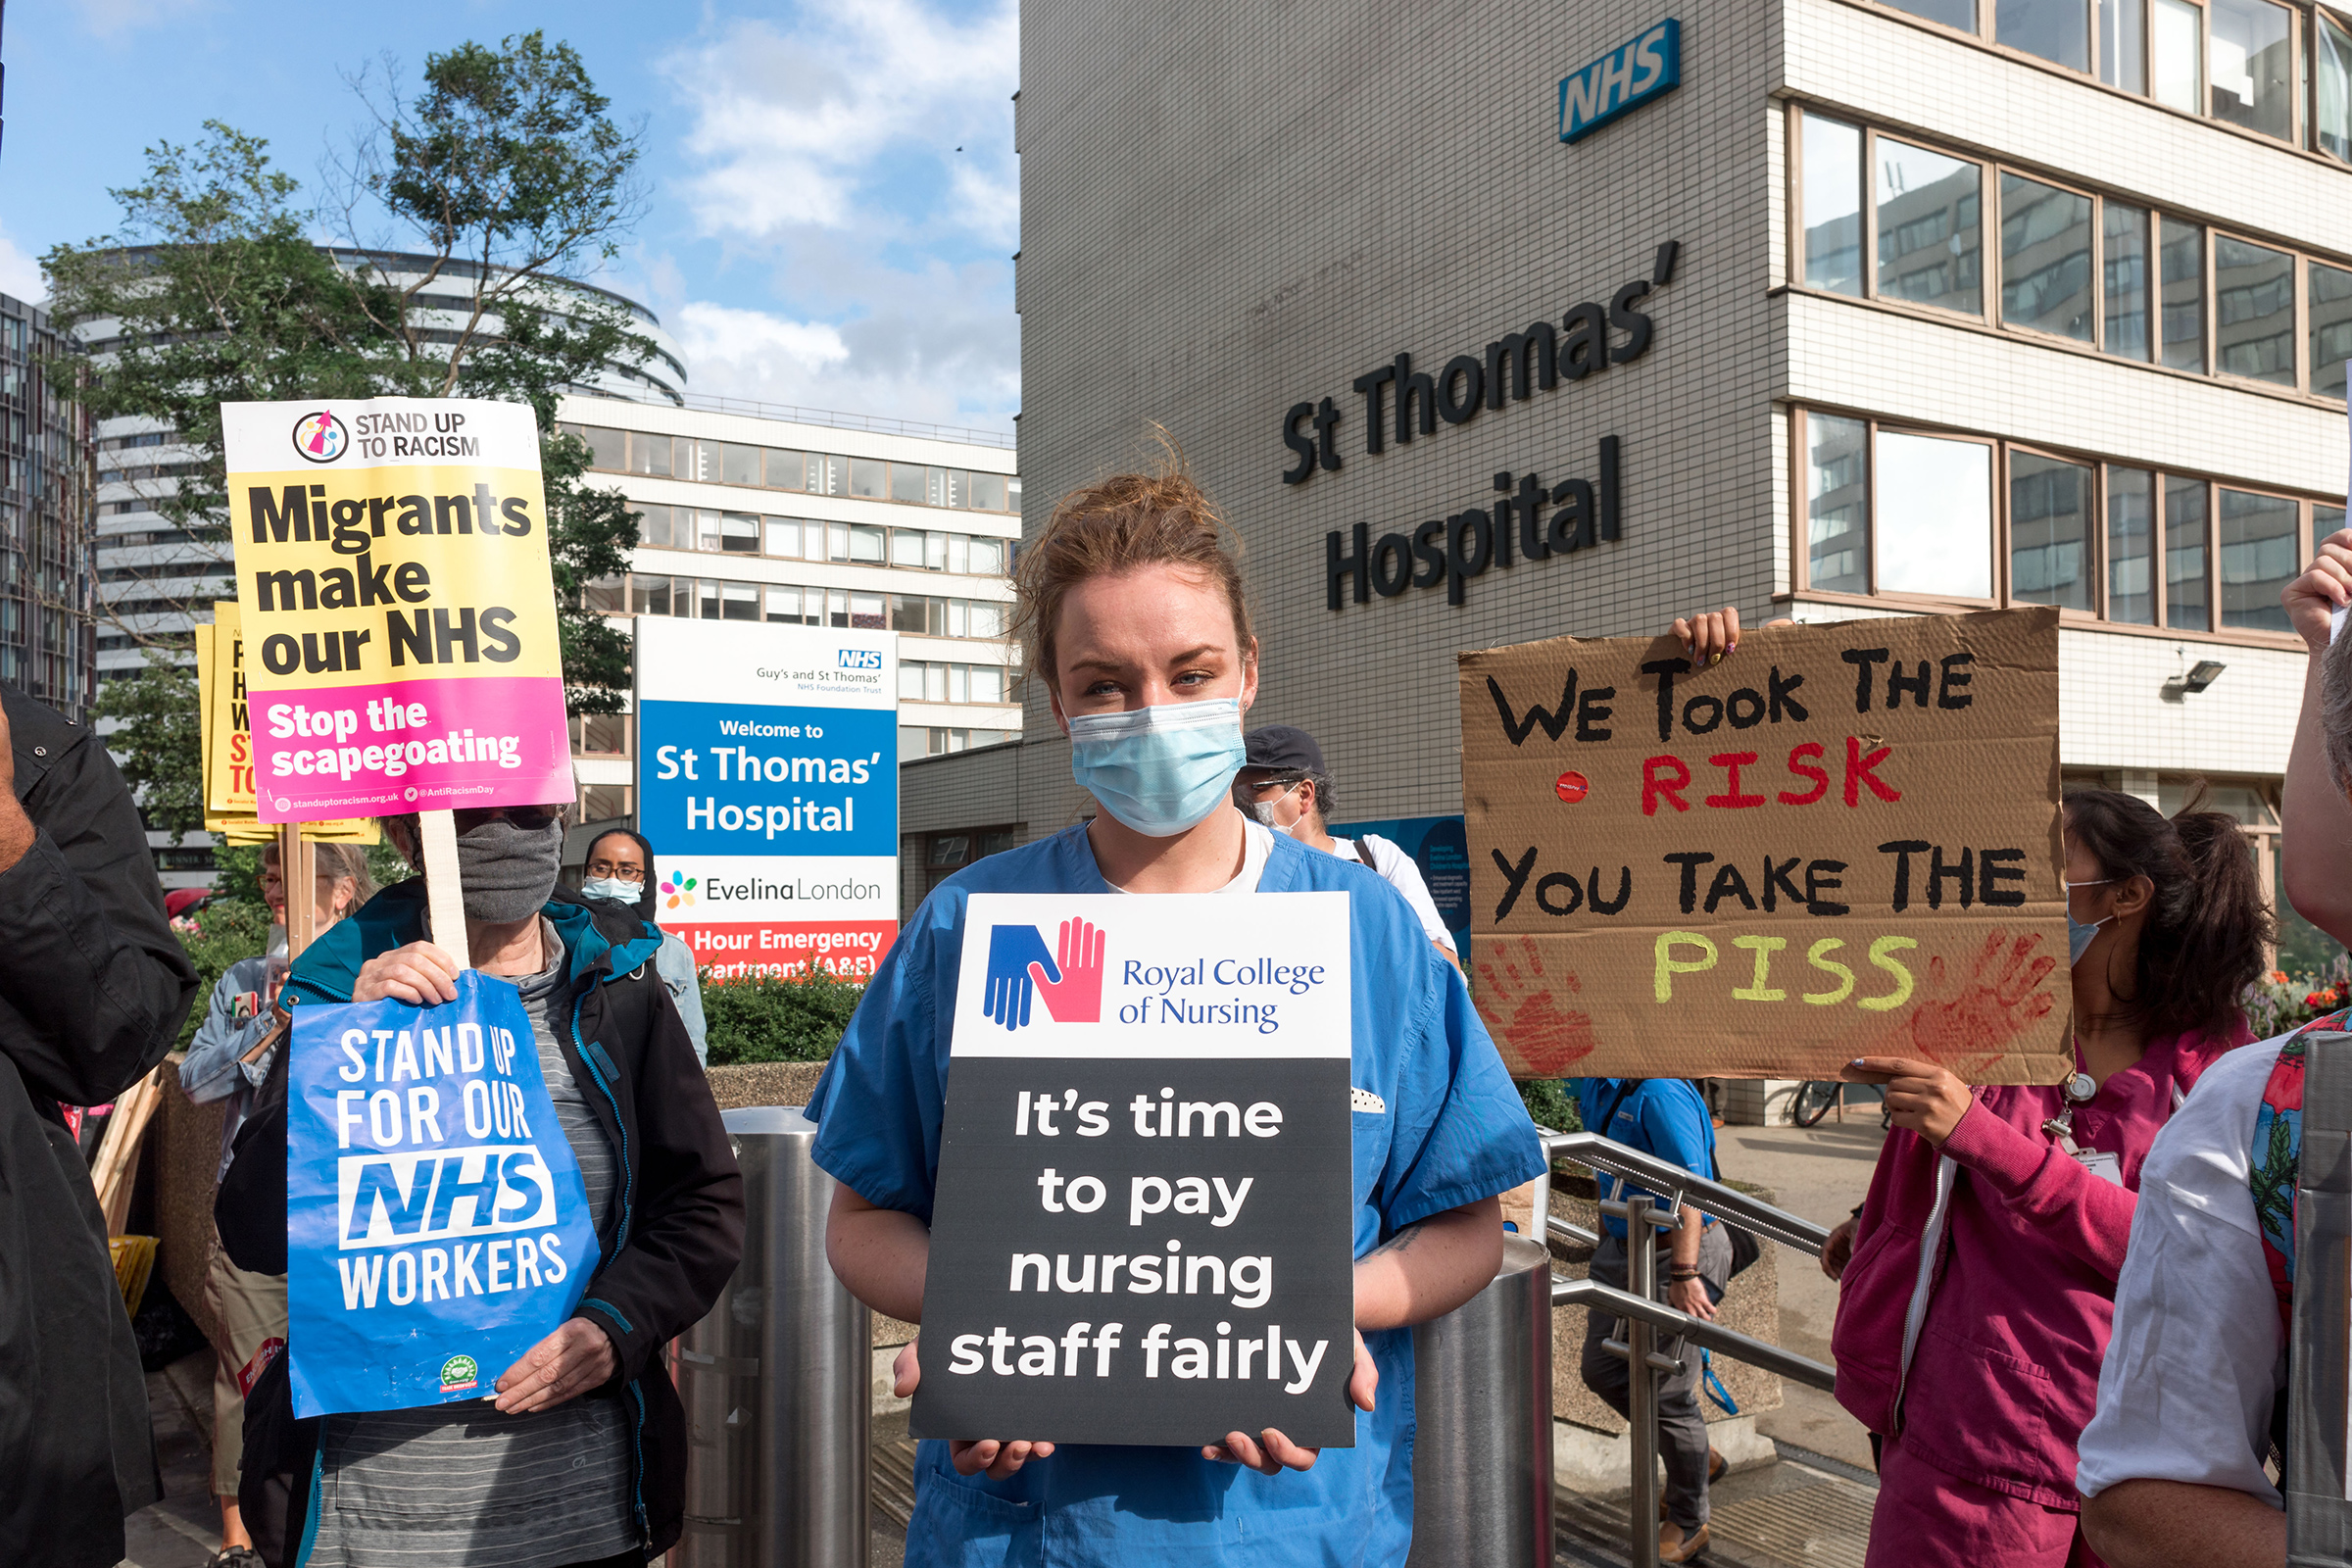 A protestor holds a placard that says "It's time to pay nursing staff fairly" outside St. Thomas' Hospital in London on July 30, 2020. (Belinda Jiao—SOPA Images/Shutterstock)